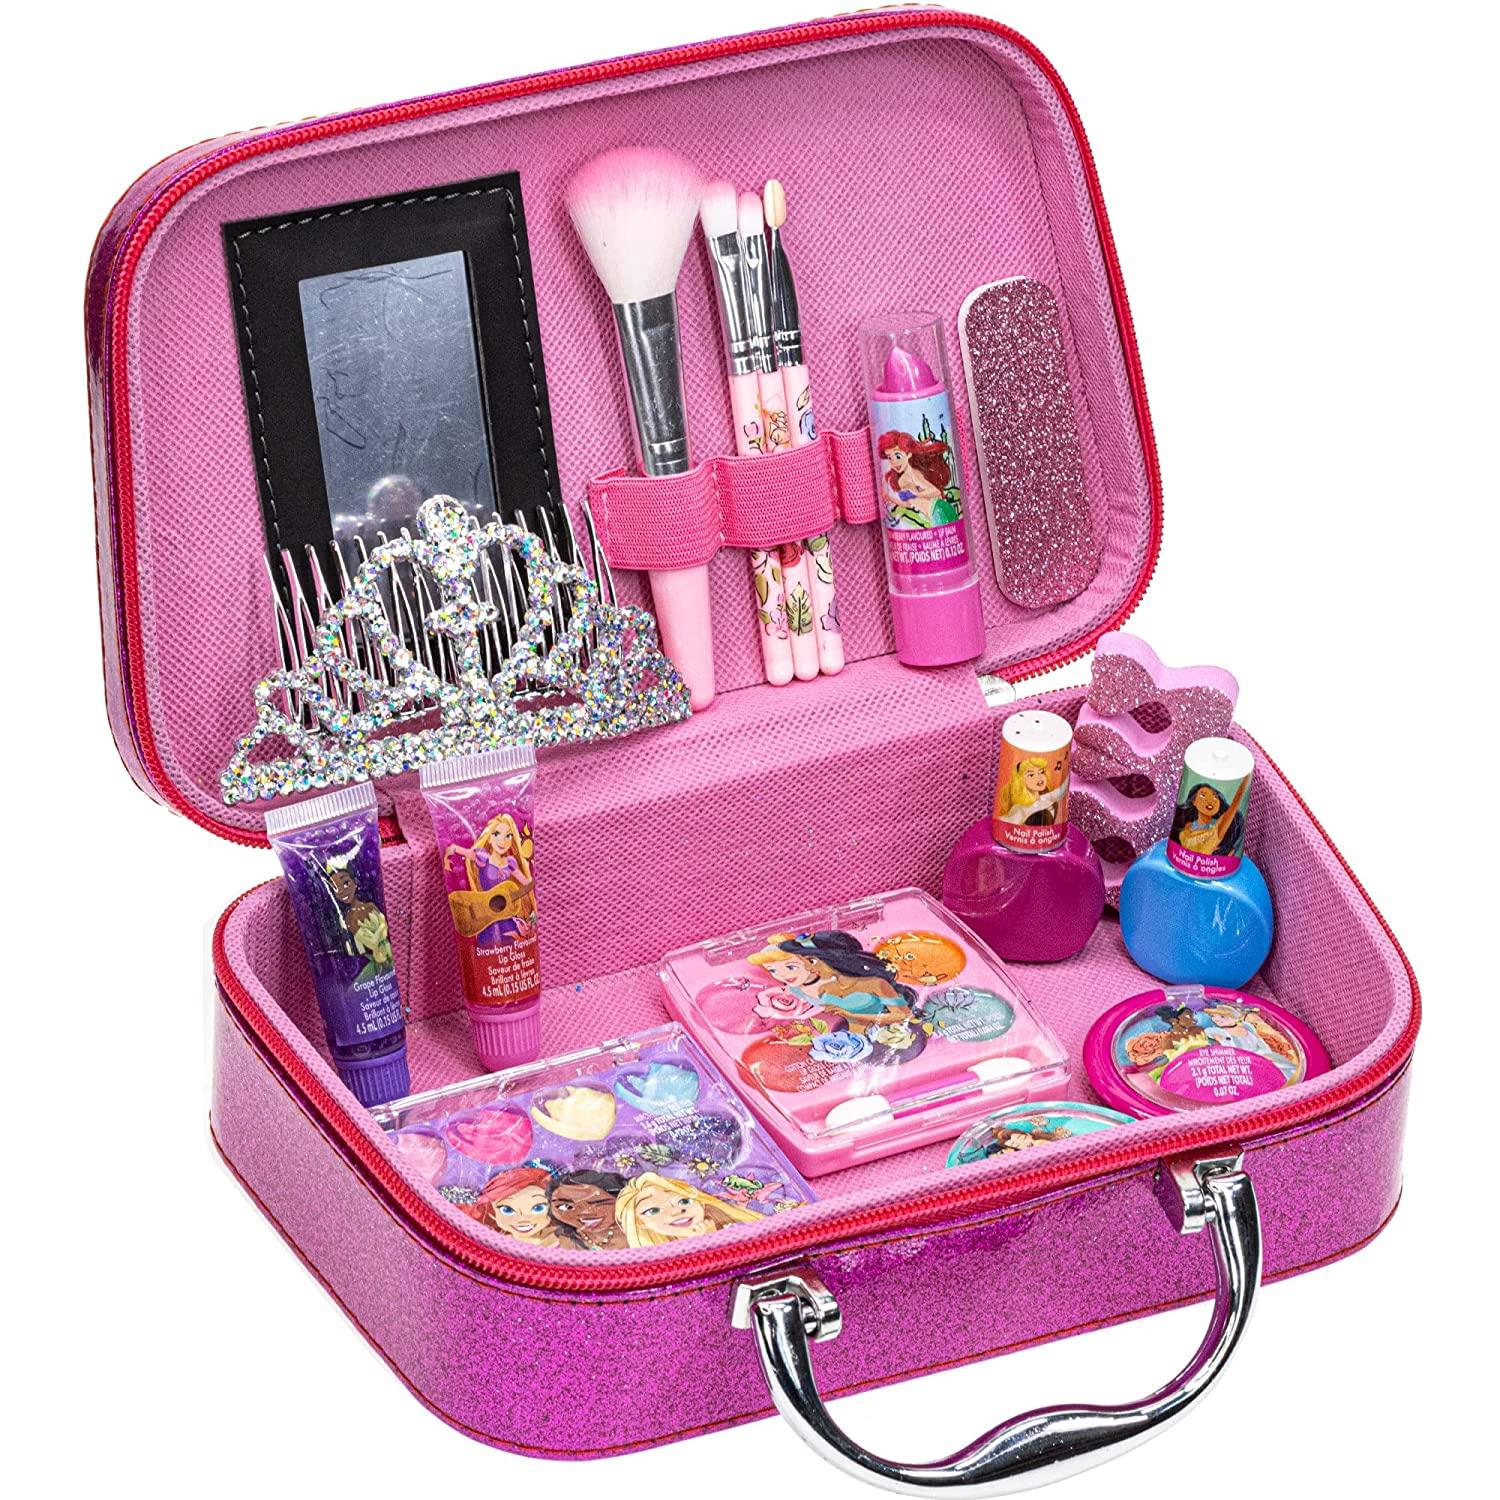 Buy Eiranss Kids Pretend Play Little Girl Purse Accessories Princess Toy  Cell Phone Fake Makeup Online at Low Prices in India - Amazon.in